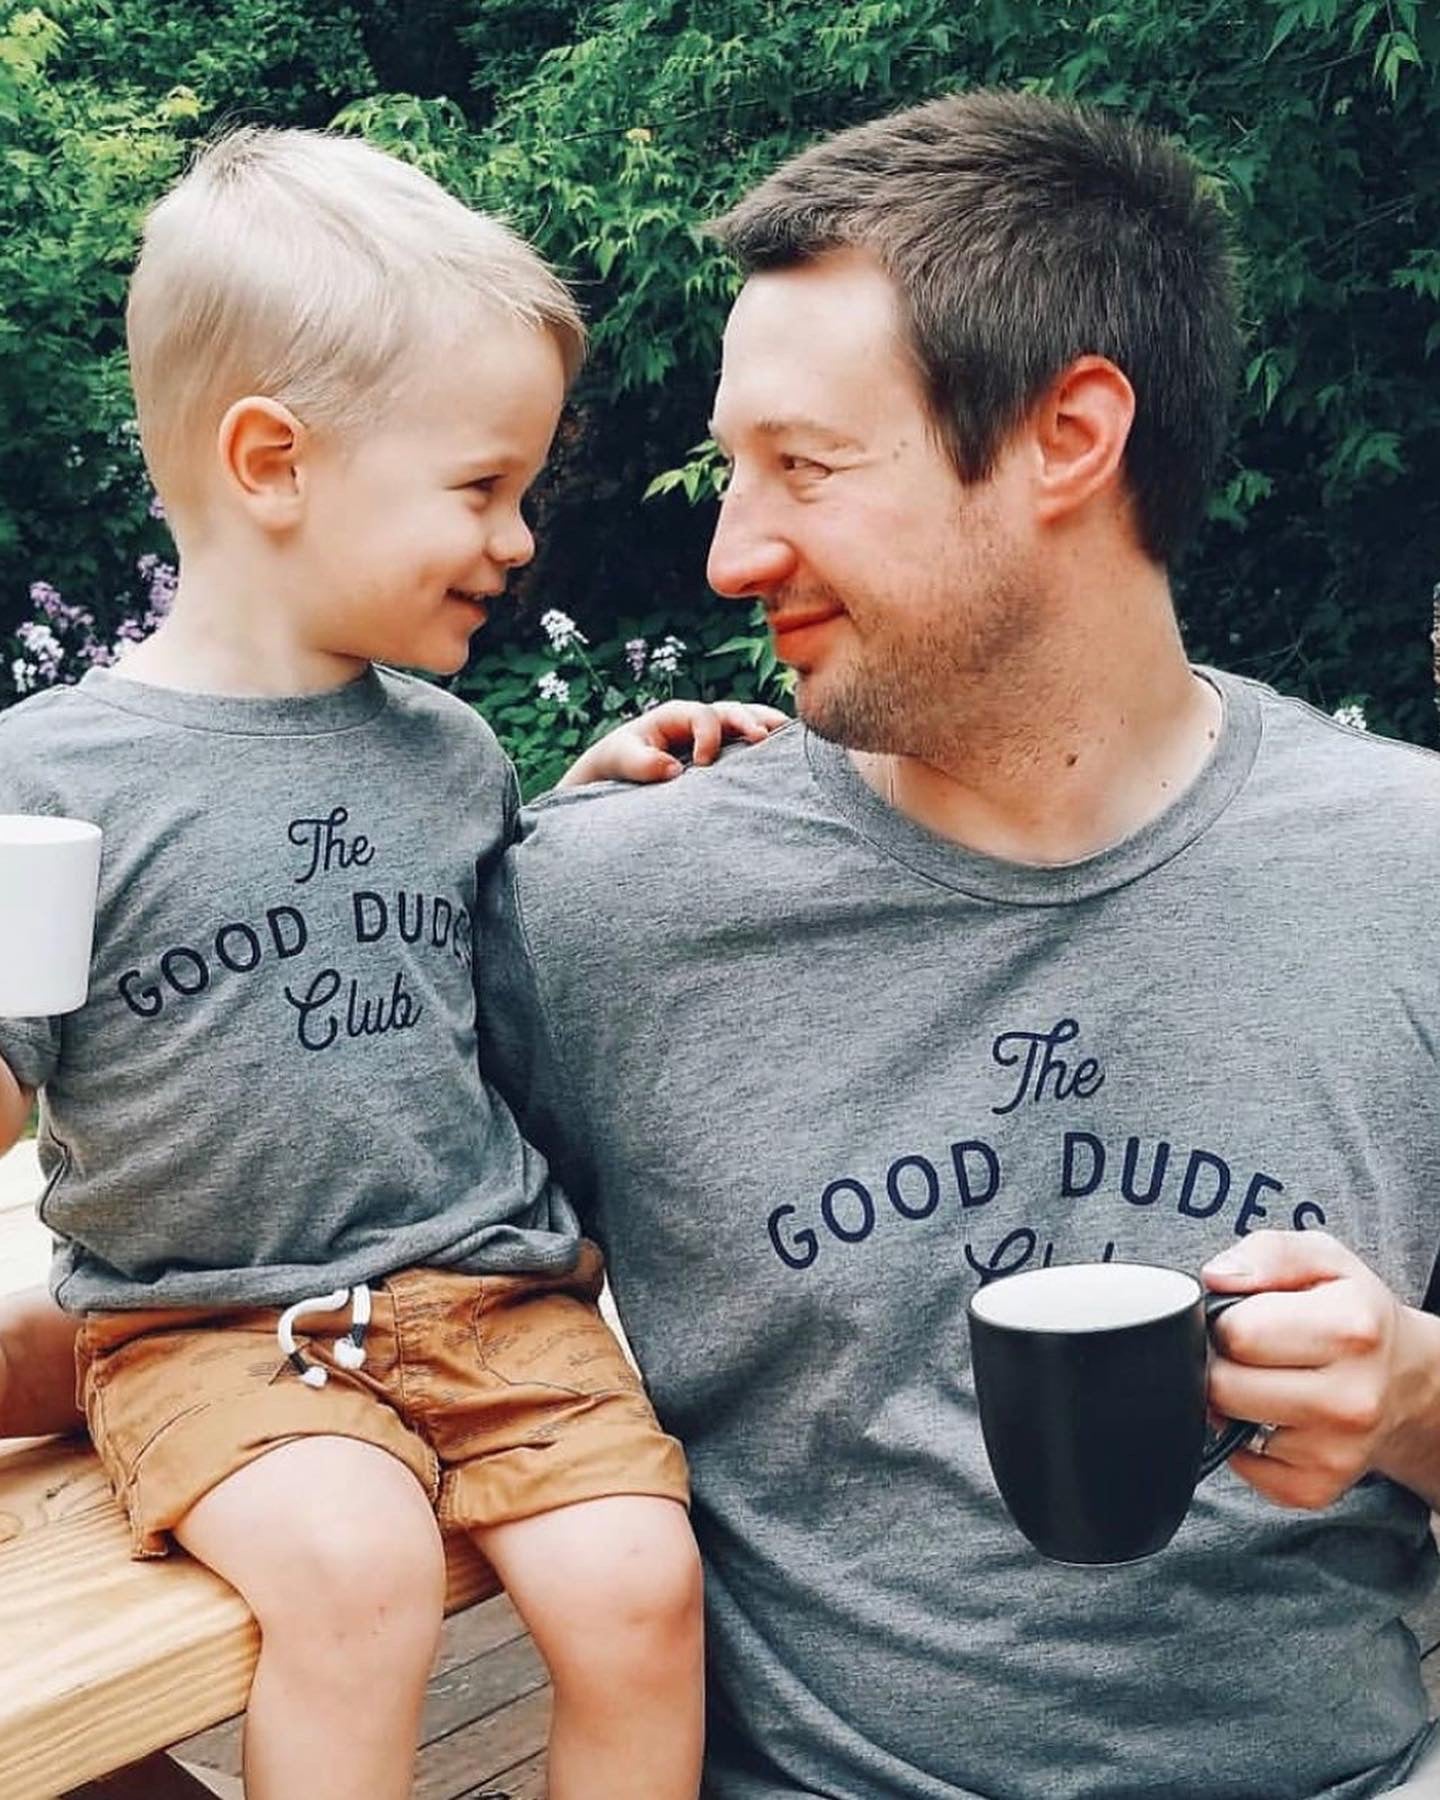 Adult Good Dudes Club, Father’s Day Shirt, Matching Dad and Son, T shirt Gift